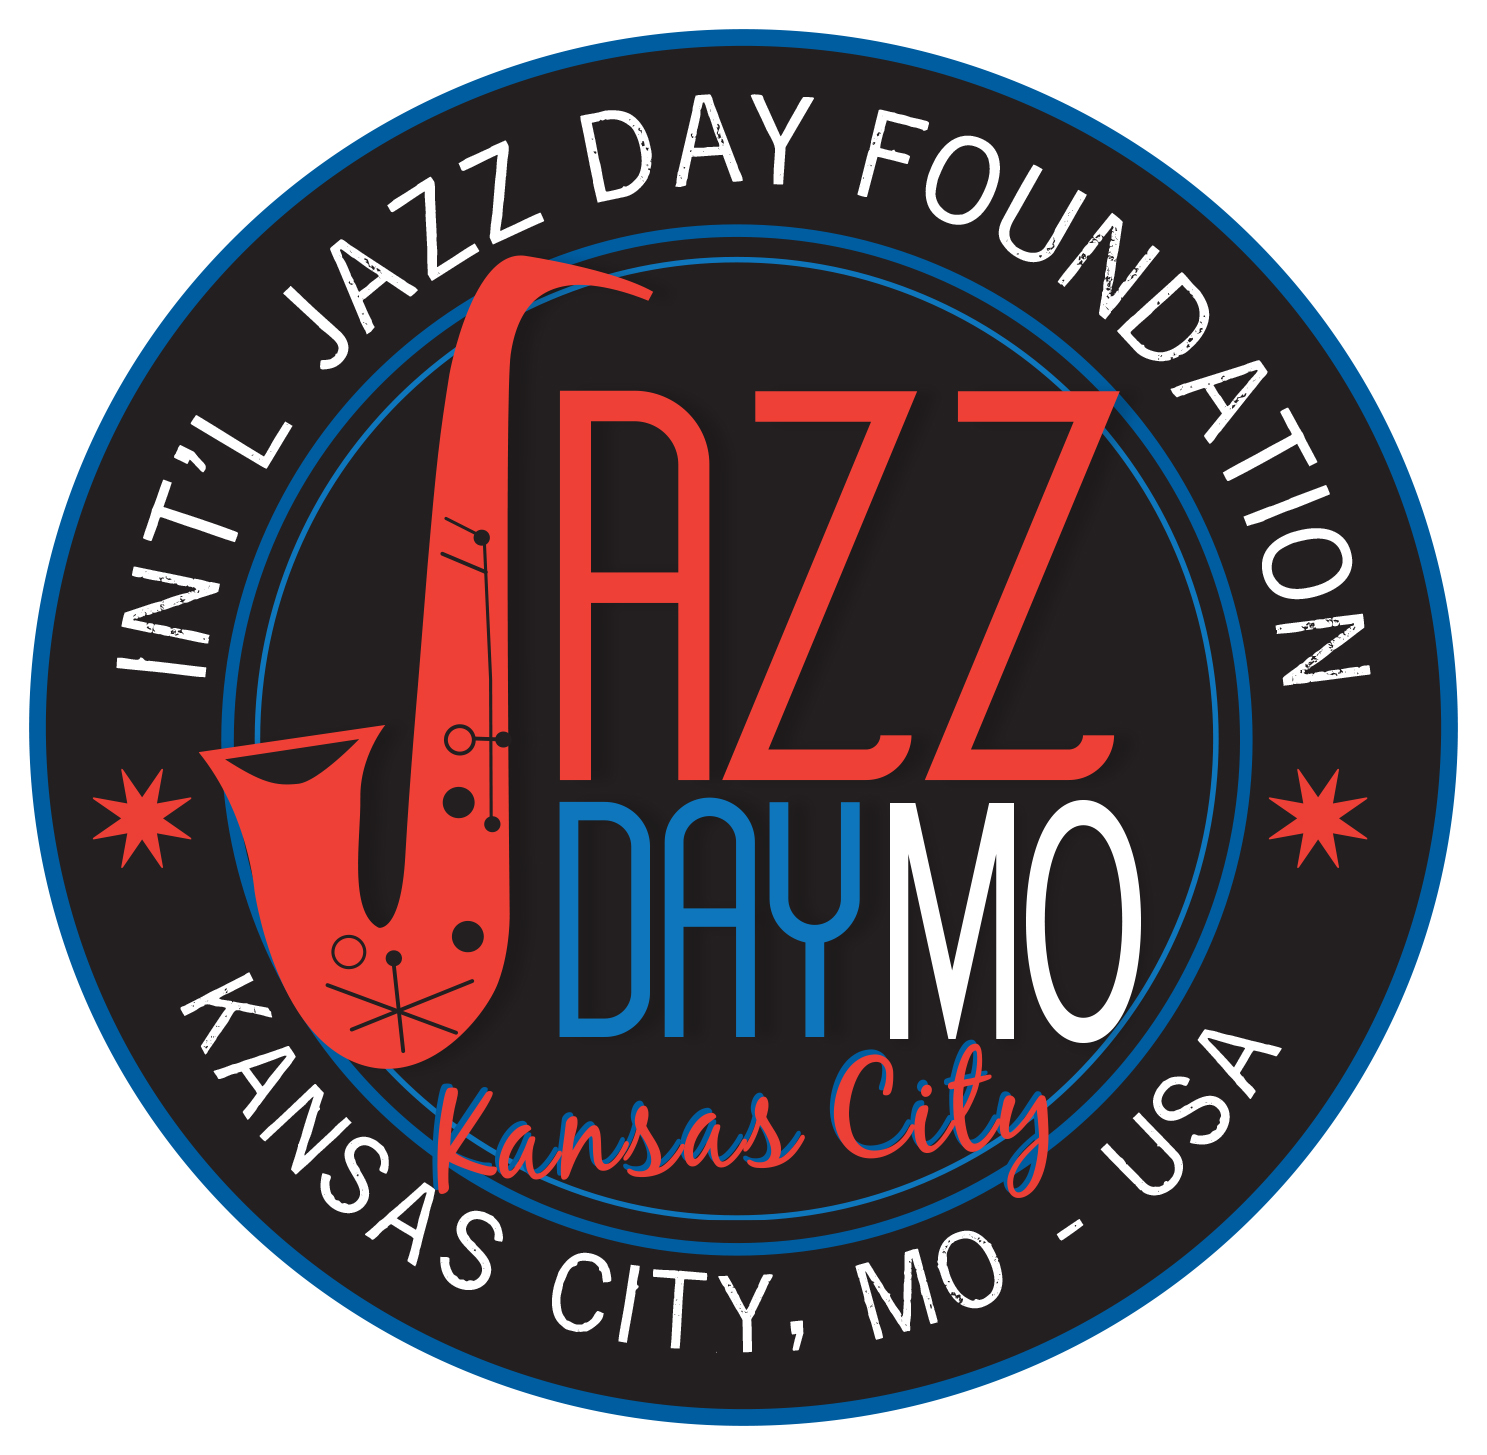 WELCOME KANSAS CITY TO OUR INT’L JAZZDAY AZ FOUNDATION TEAM